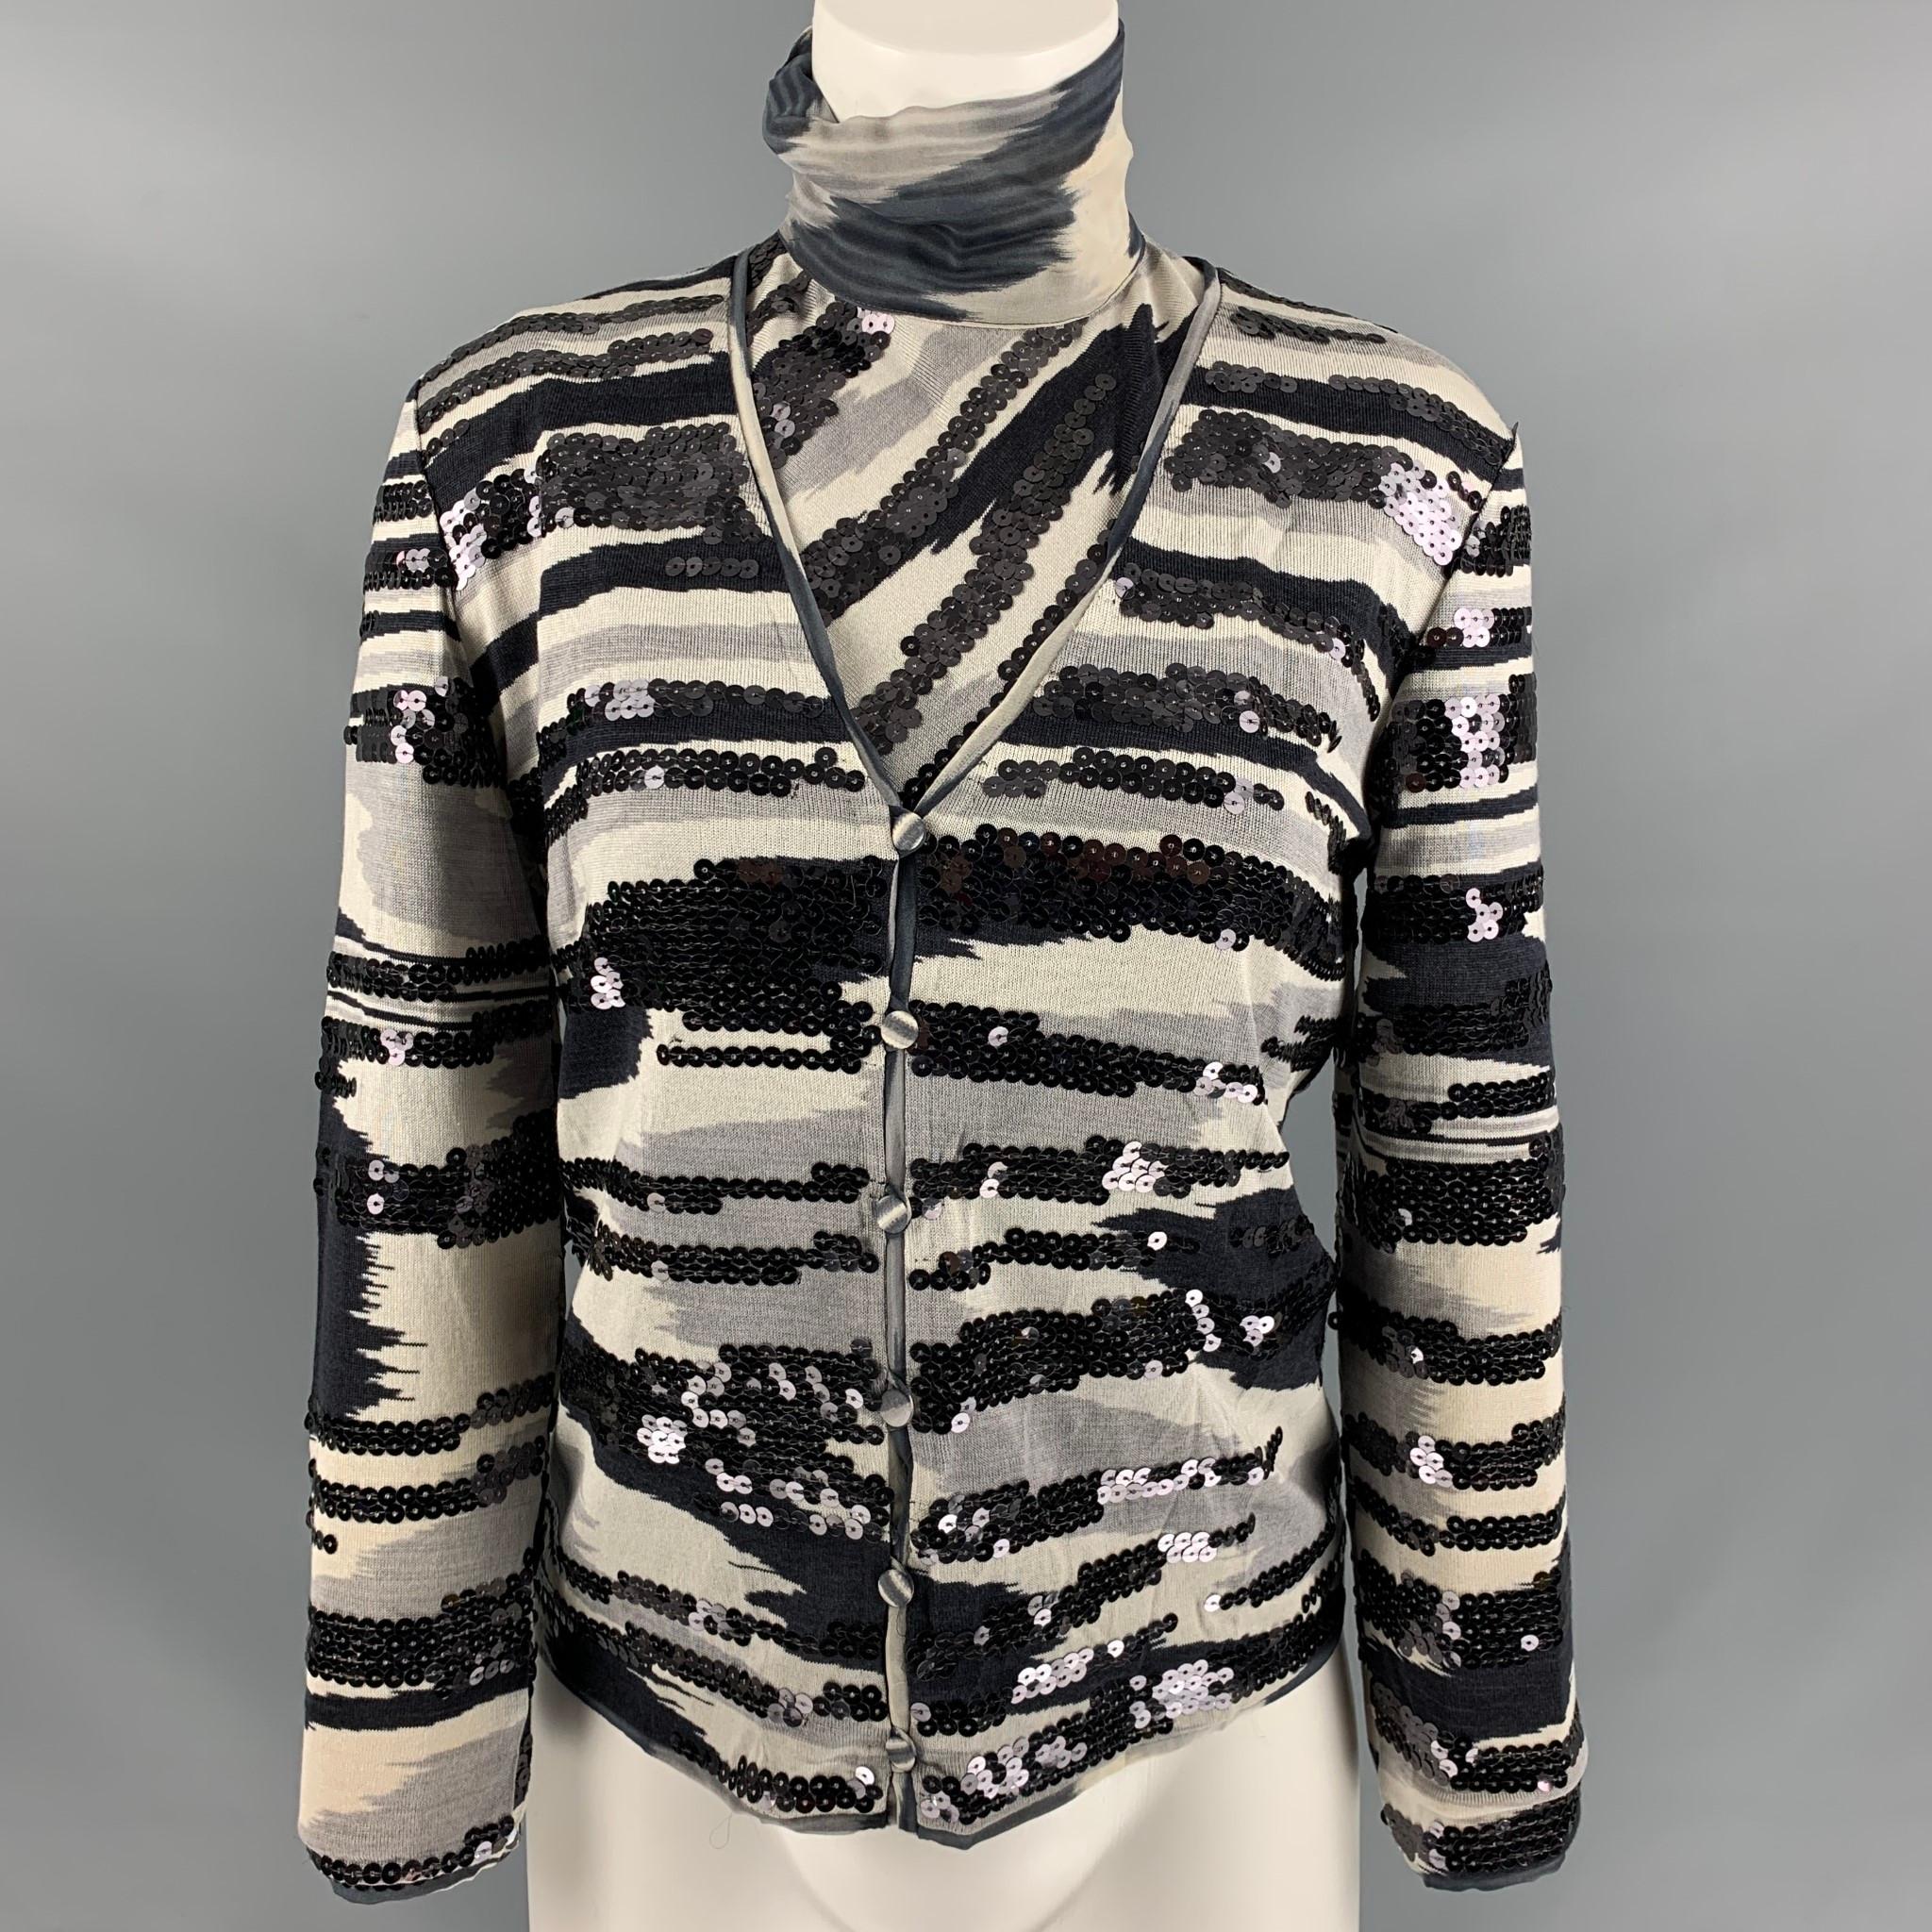 MISSONI dress top set comes in a black and grey silk featuring a sequins embroidery, turtleneck, button down. Made in Italy.

Excellent Pre-Owned Condition.
Marked: 42

Measurements:

Shoulder: 16 in
Bust: 38 in
Sleeve: 21 in
Length: 22 in

 

SKU: